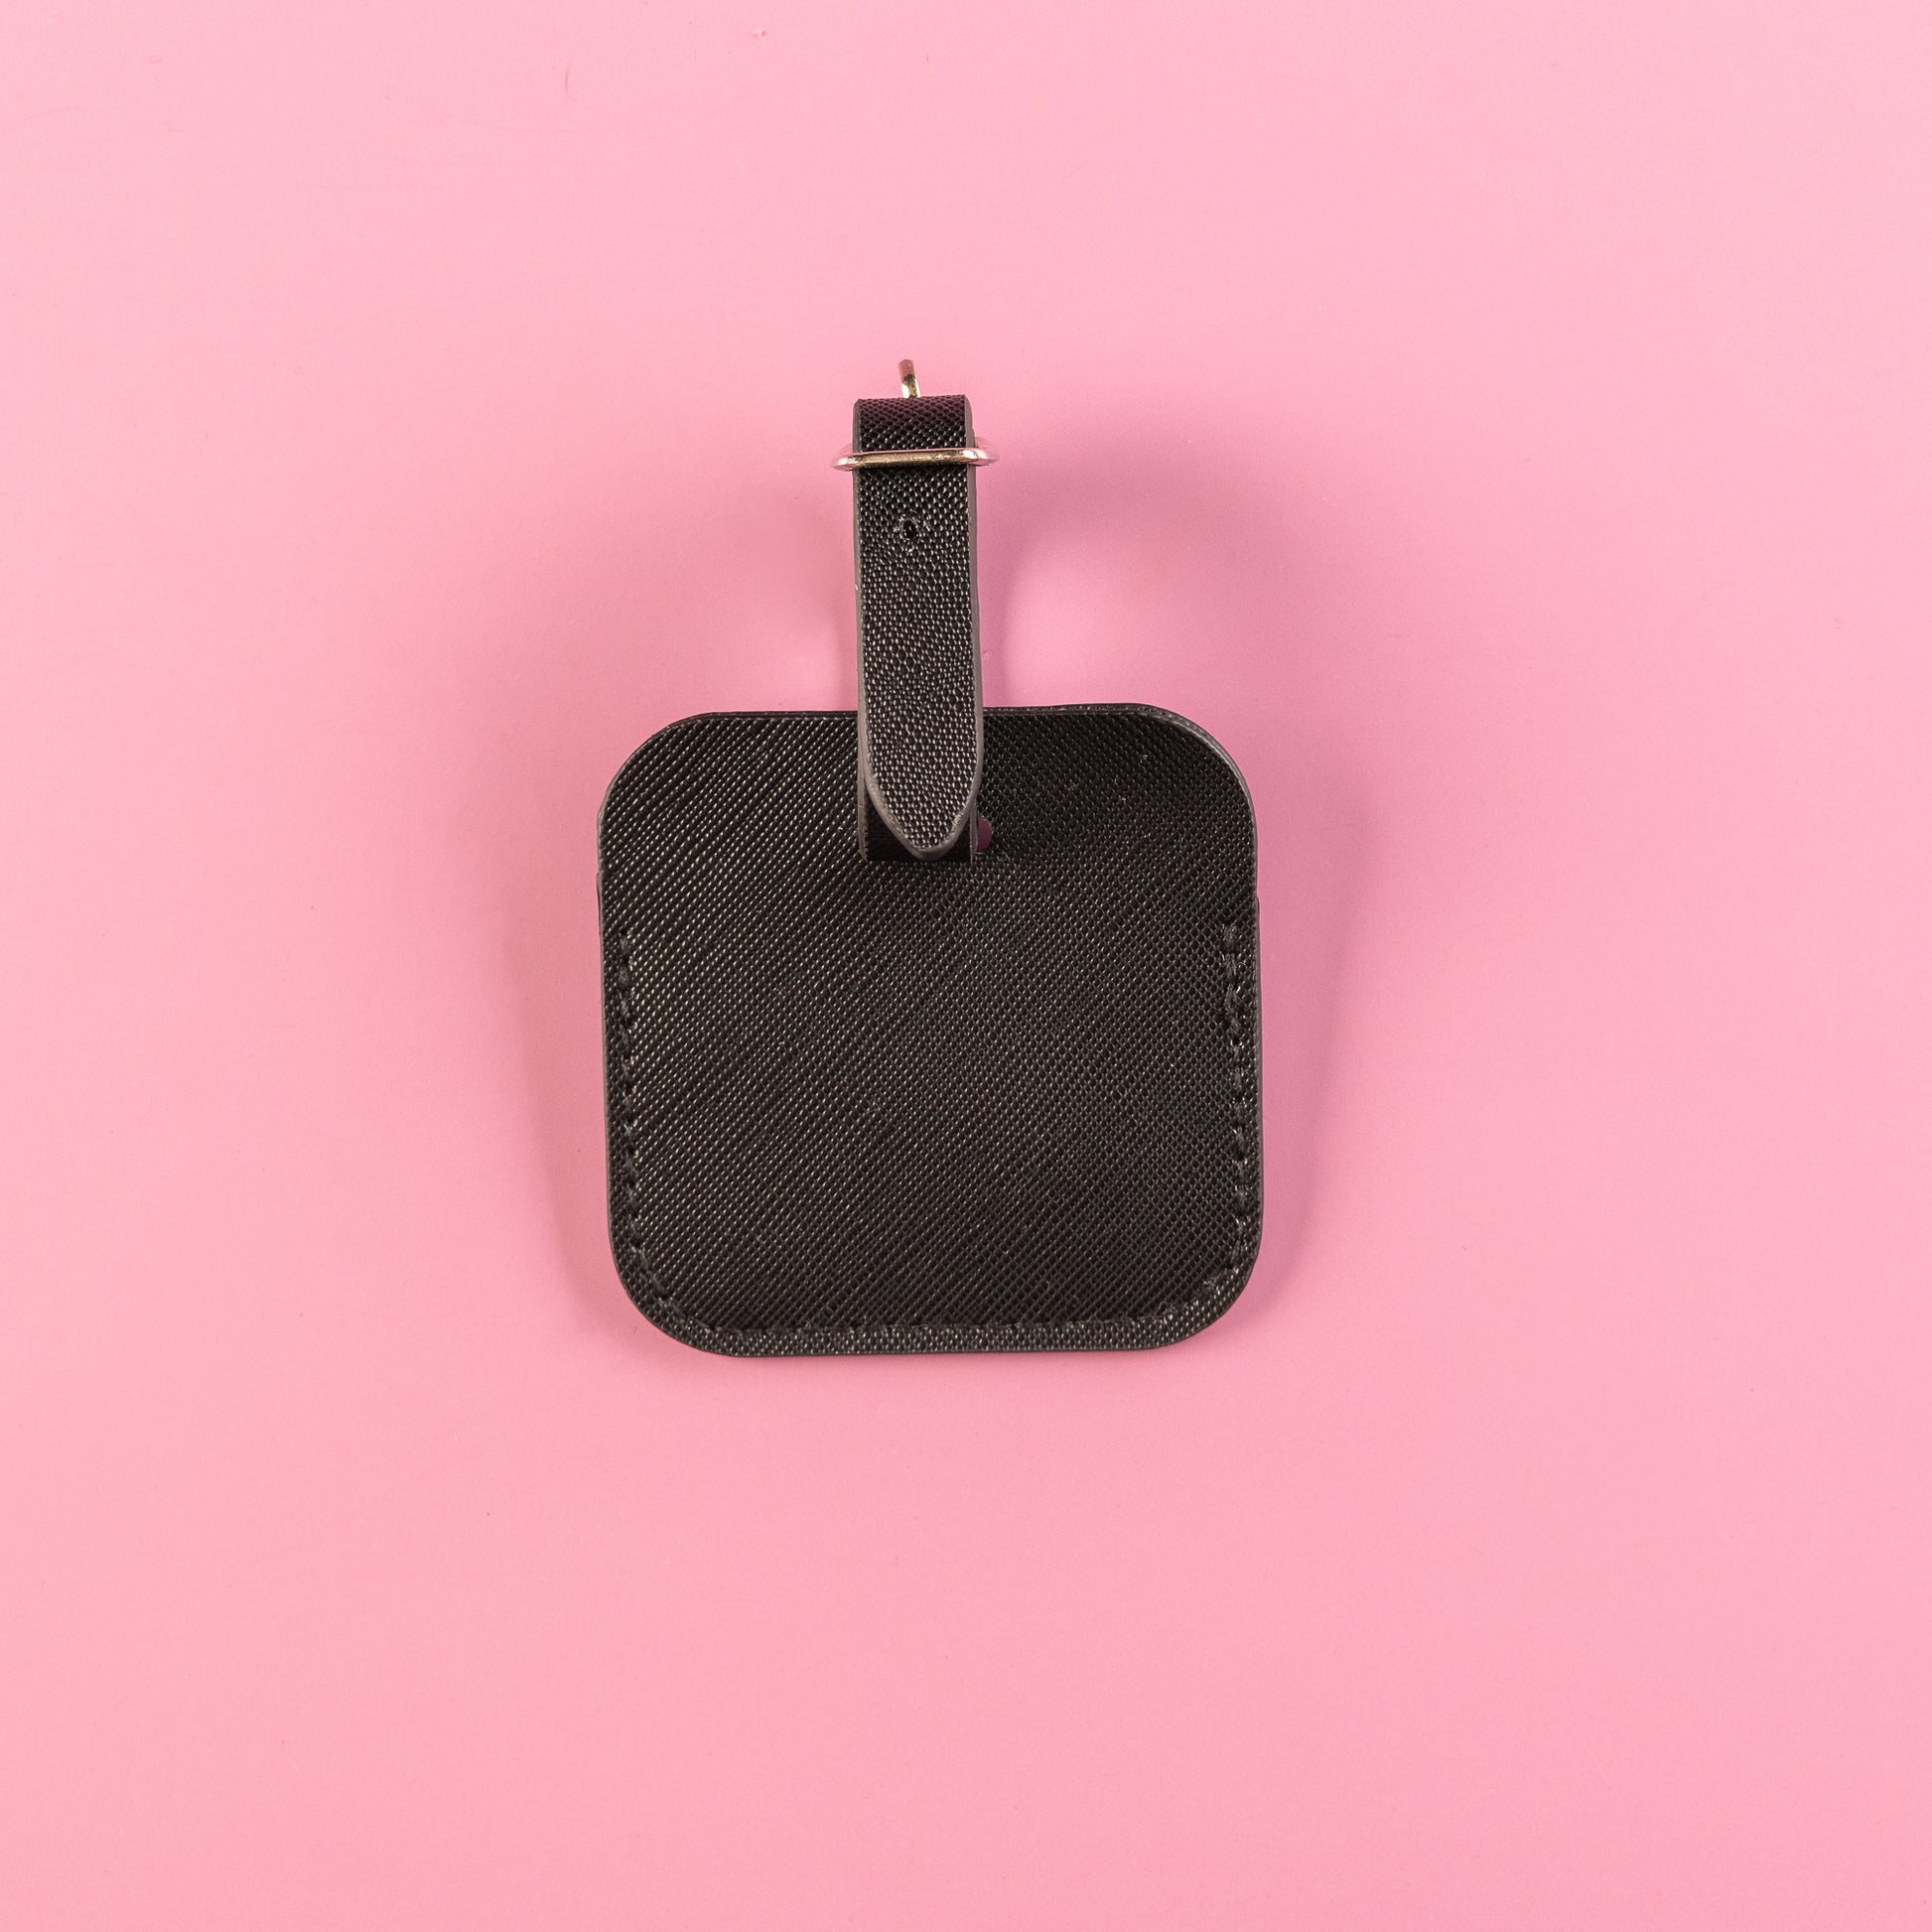 Black, square luggage tag with lift up flap to see owners details underneath. Luggage tag includes adjustable strap with silver hardware. All set on a pink background. This is the back of the luggage tag. 